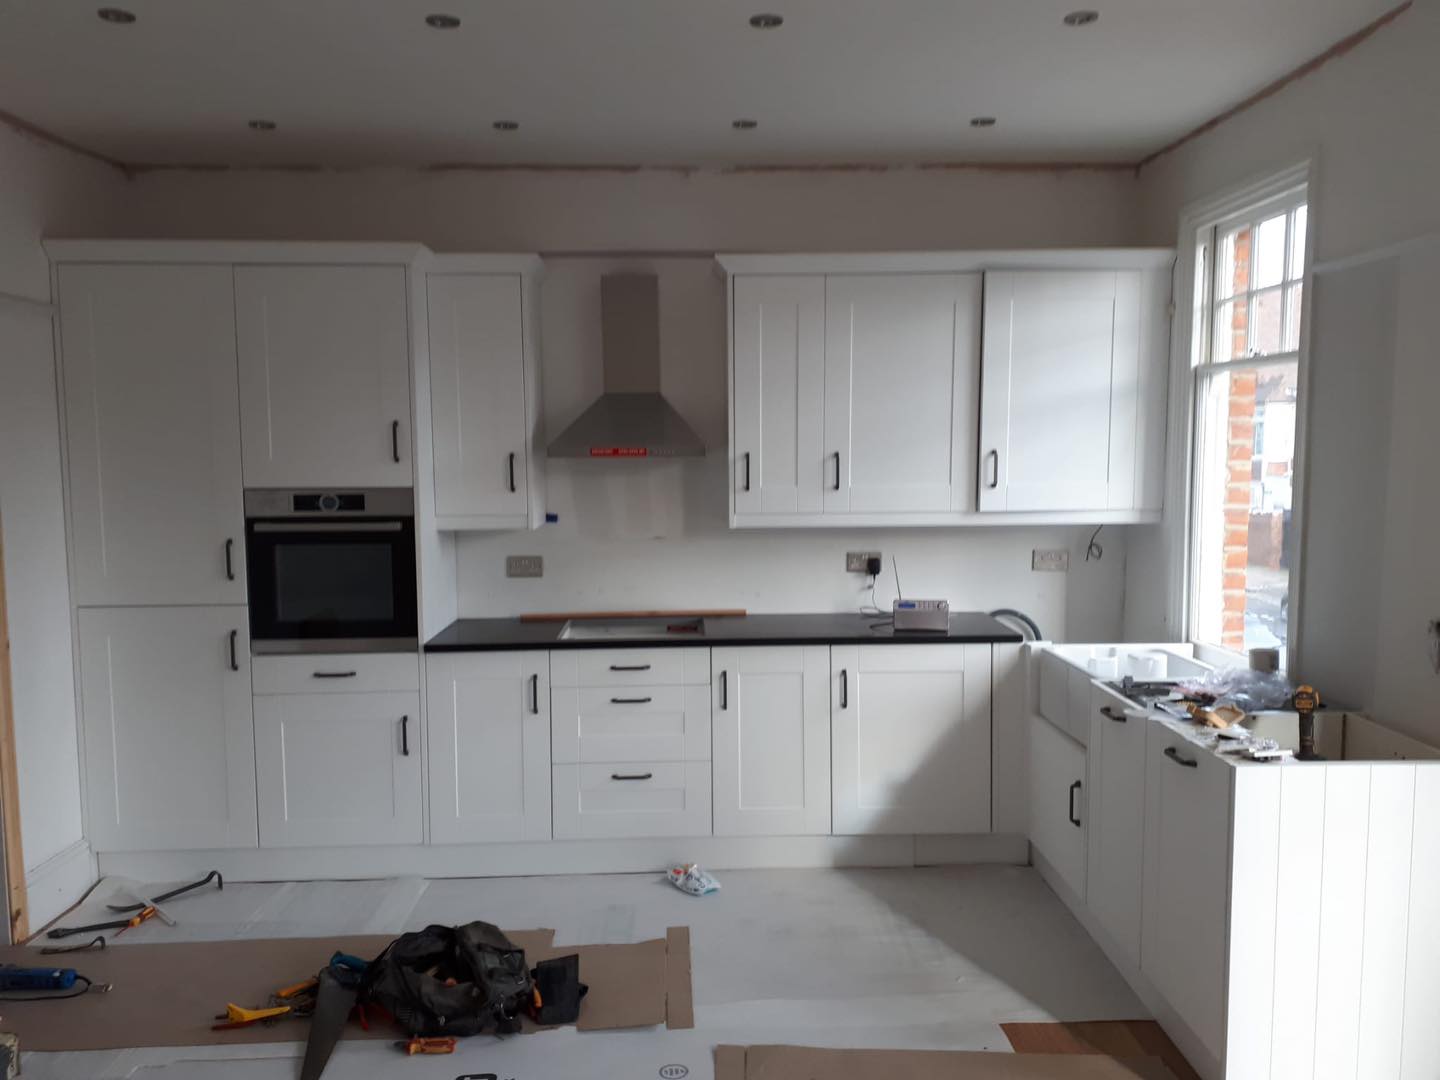 Fitting a kitchen